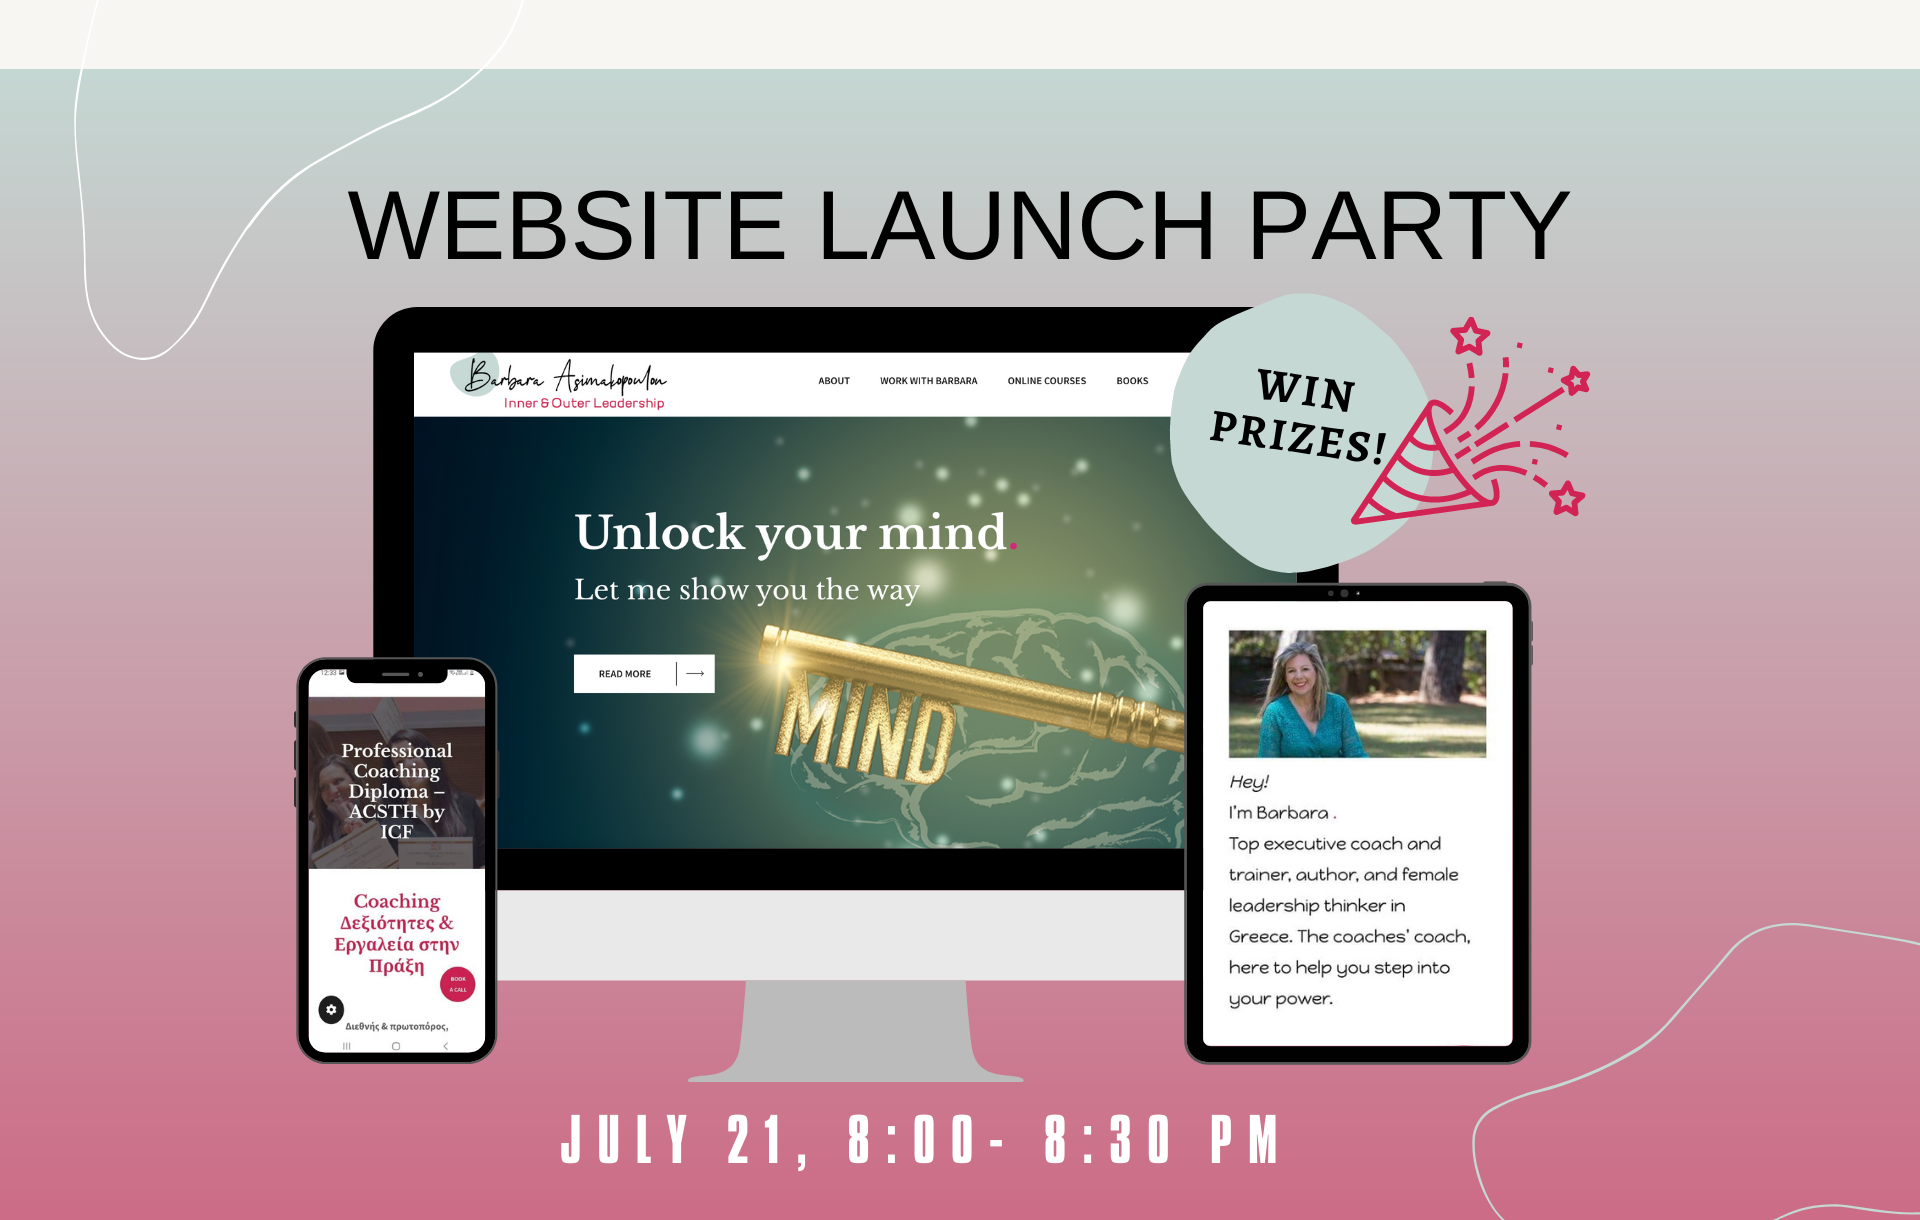 My Website Launch Party